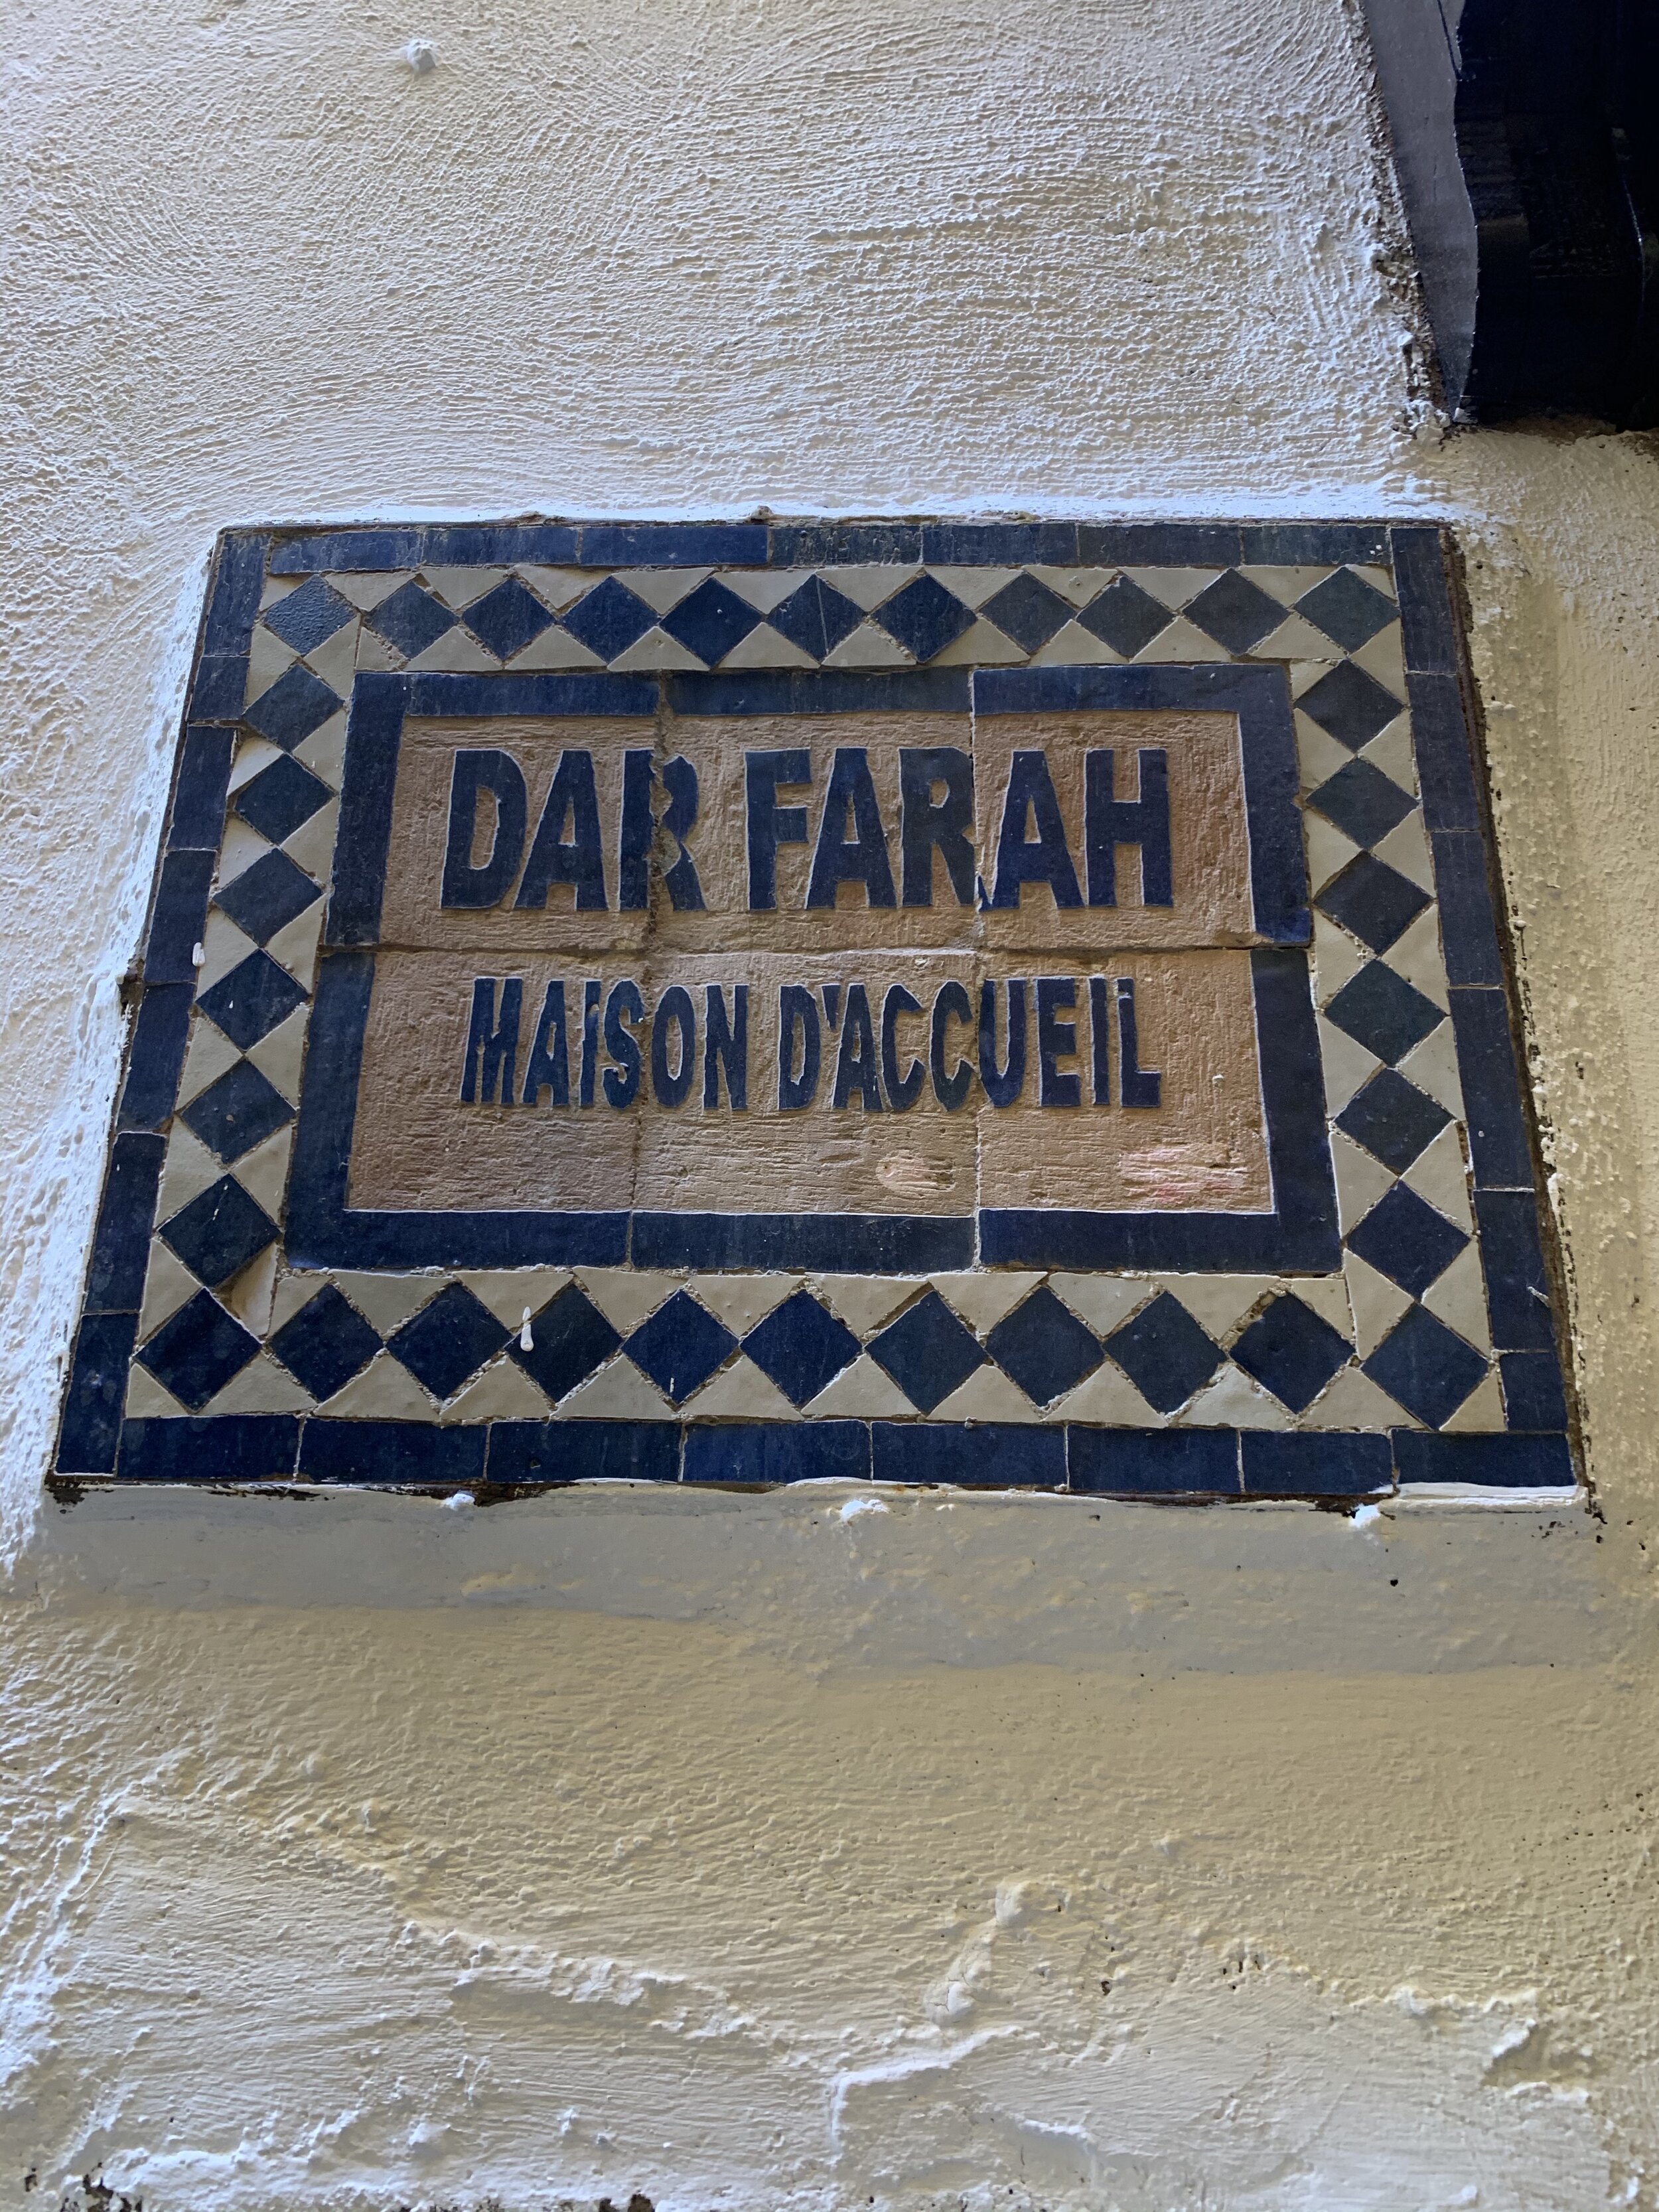 Pics from Riad (or Dar) Farah. I have yet to get a good explanation of the difference. Although "riad" is garden, as in the interior courtyard. Dar means house, is my bet.